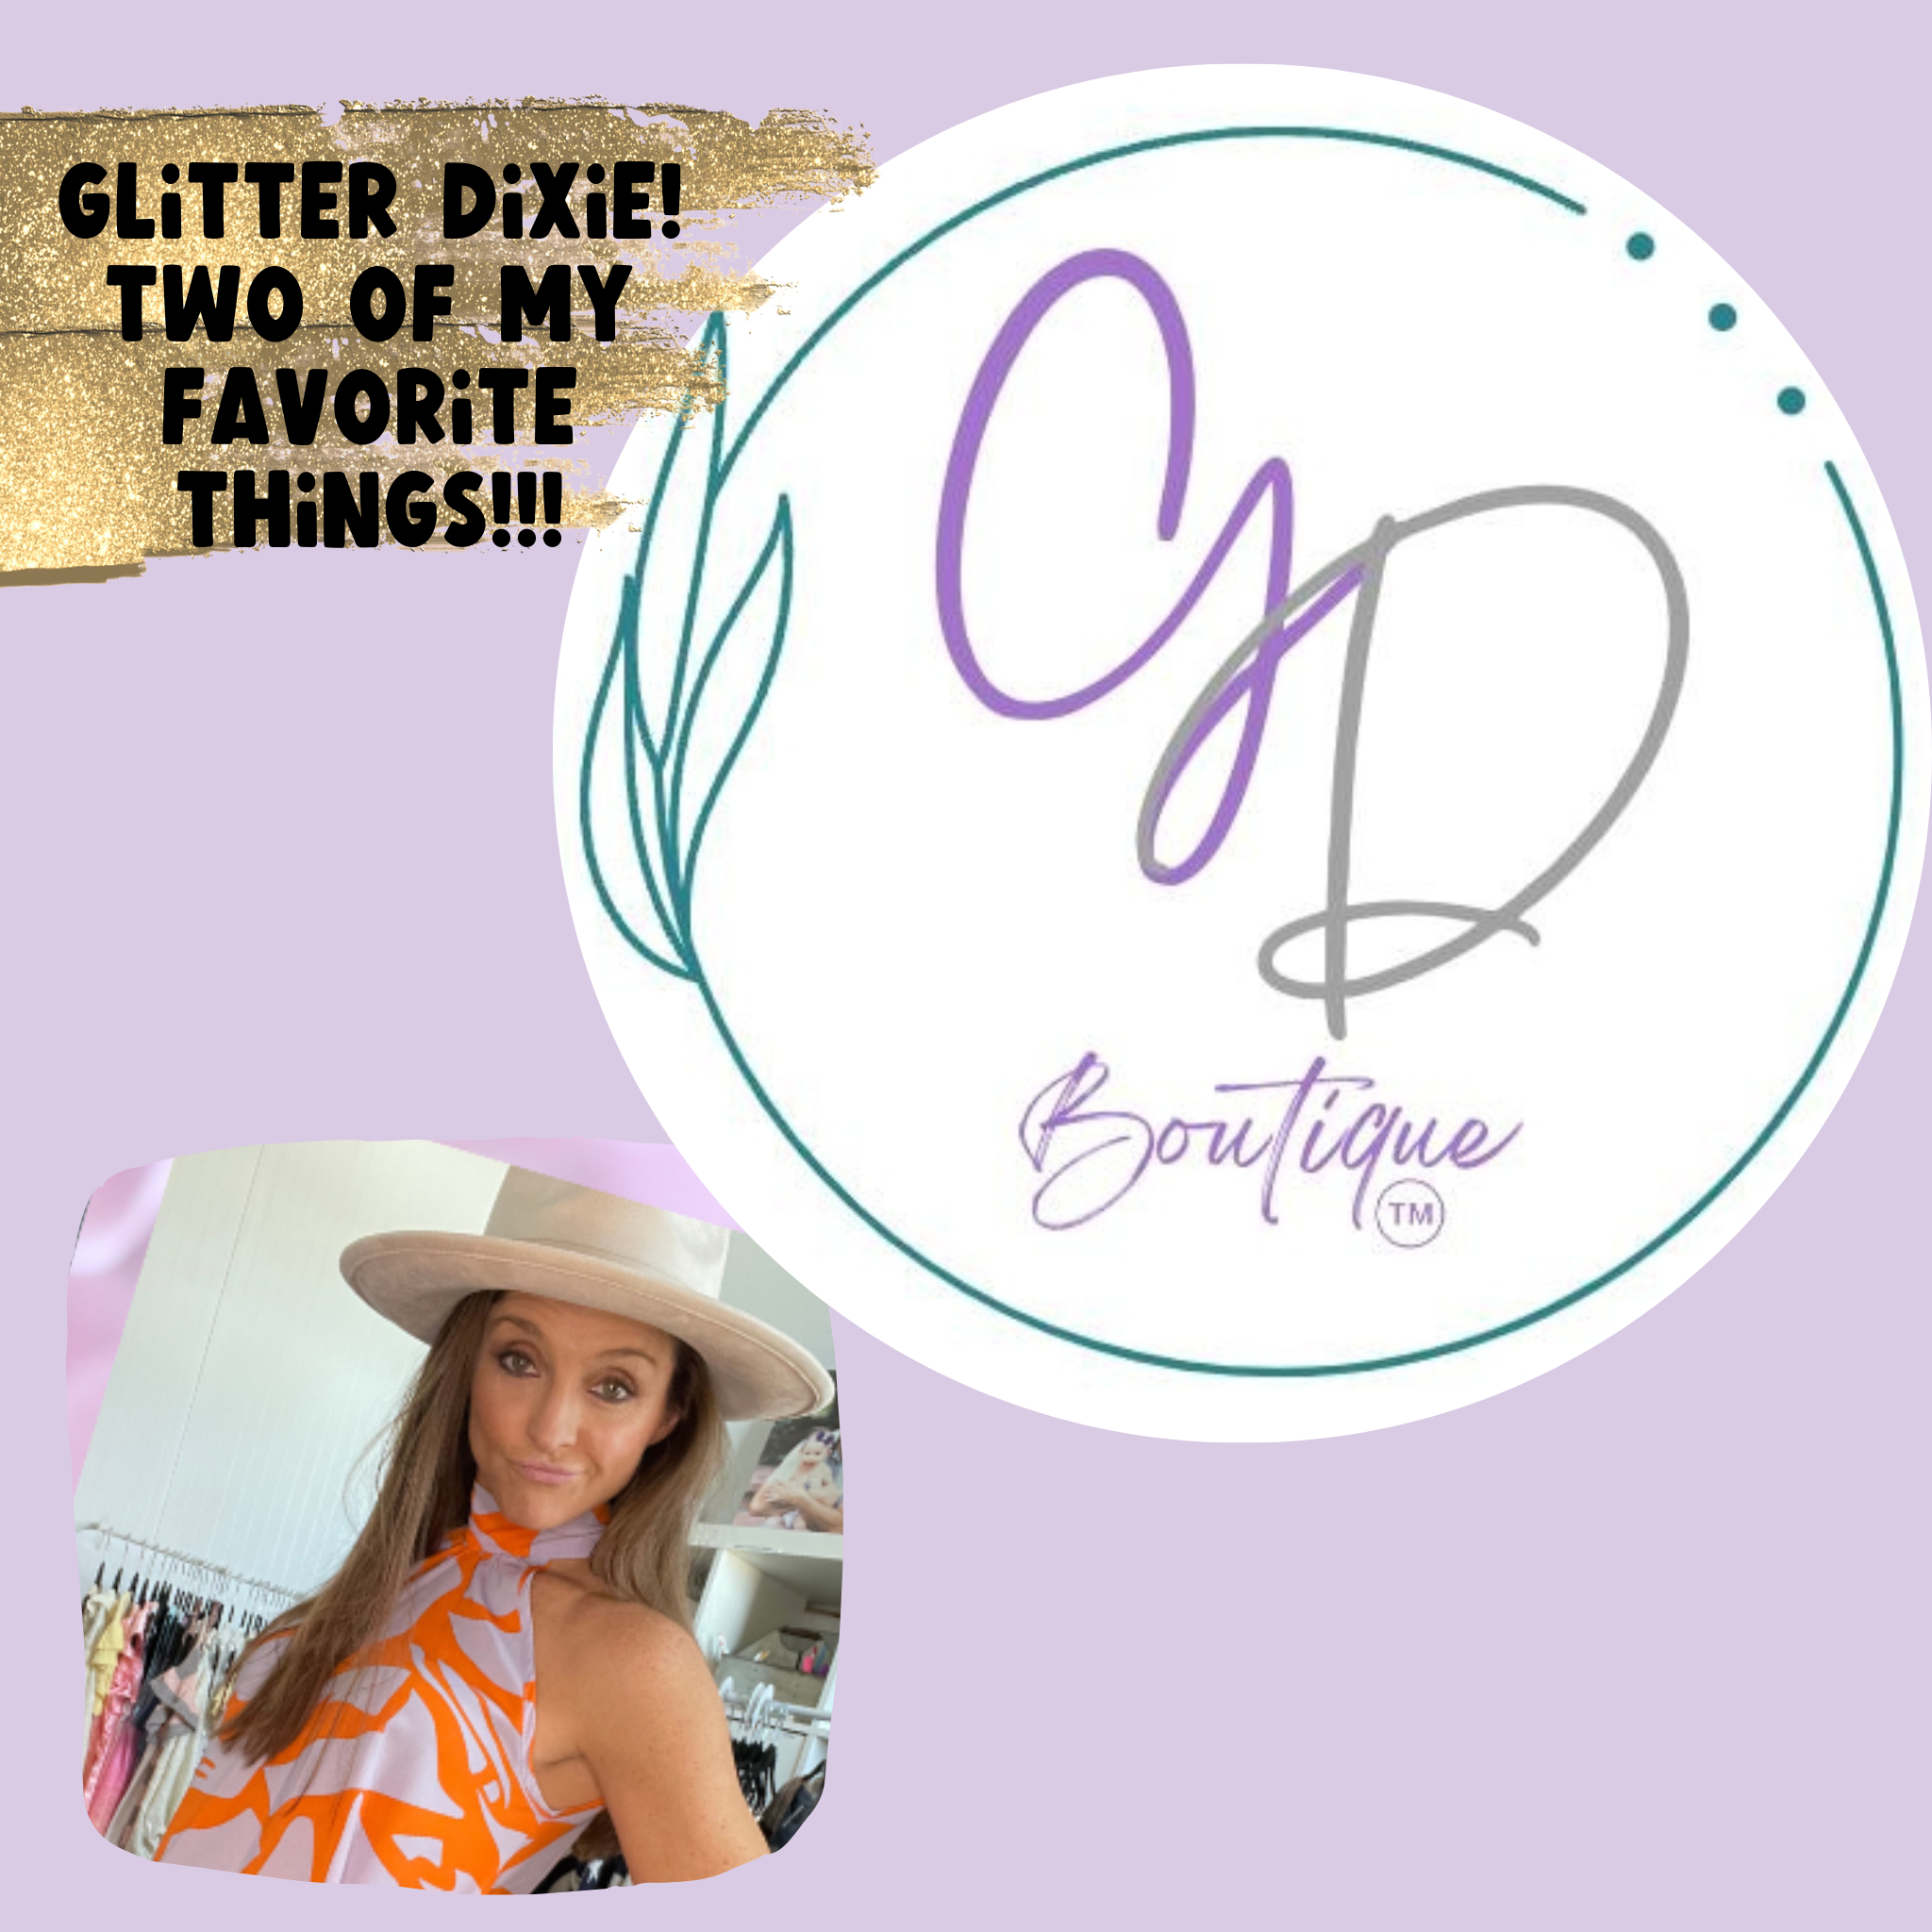 A photo of Lindsey Krisko, owner and founder of the clothing boutiques Glitter Dixie Designs and Glitter Dixie Collective